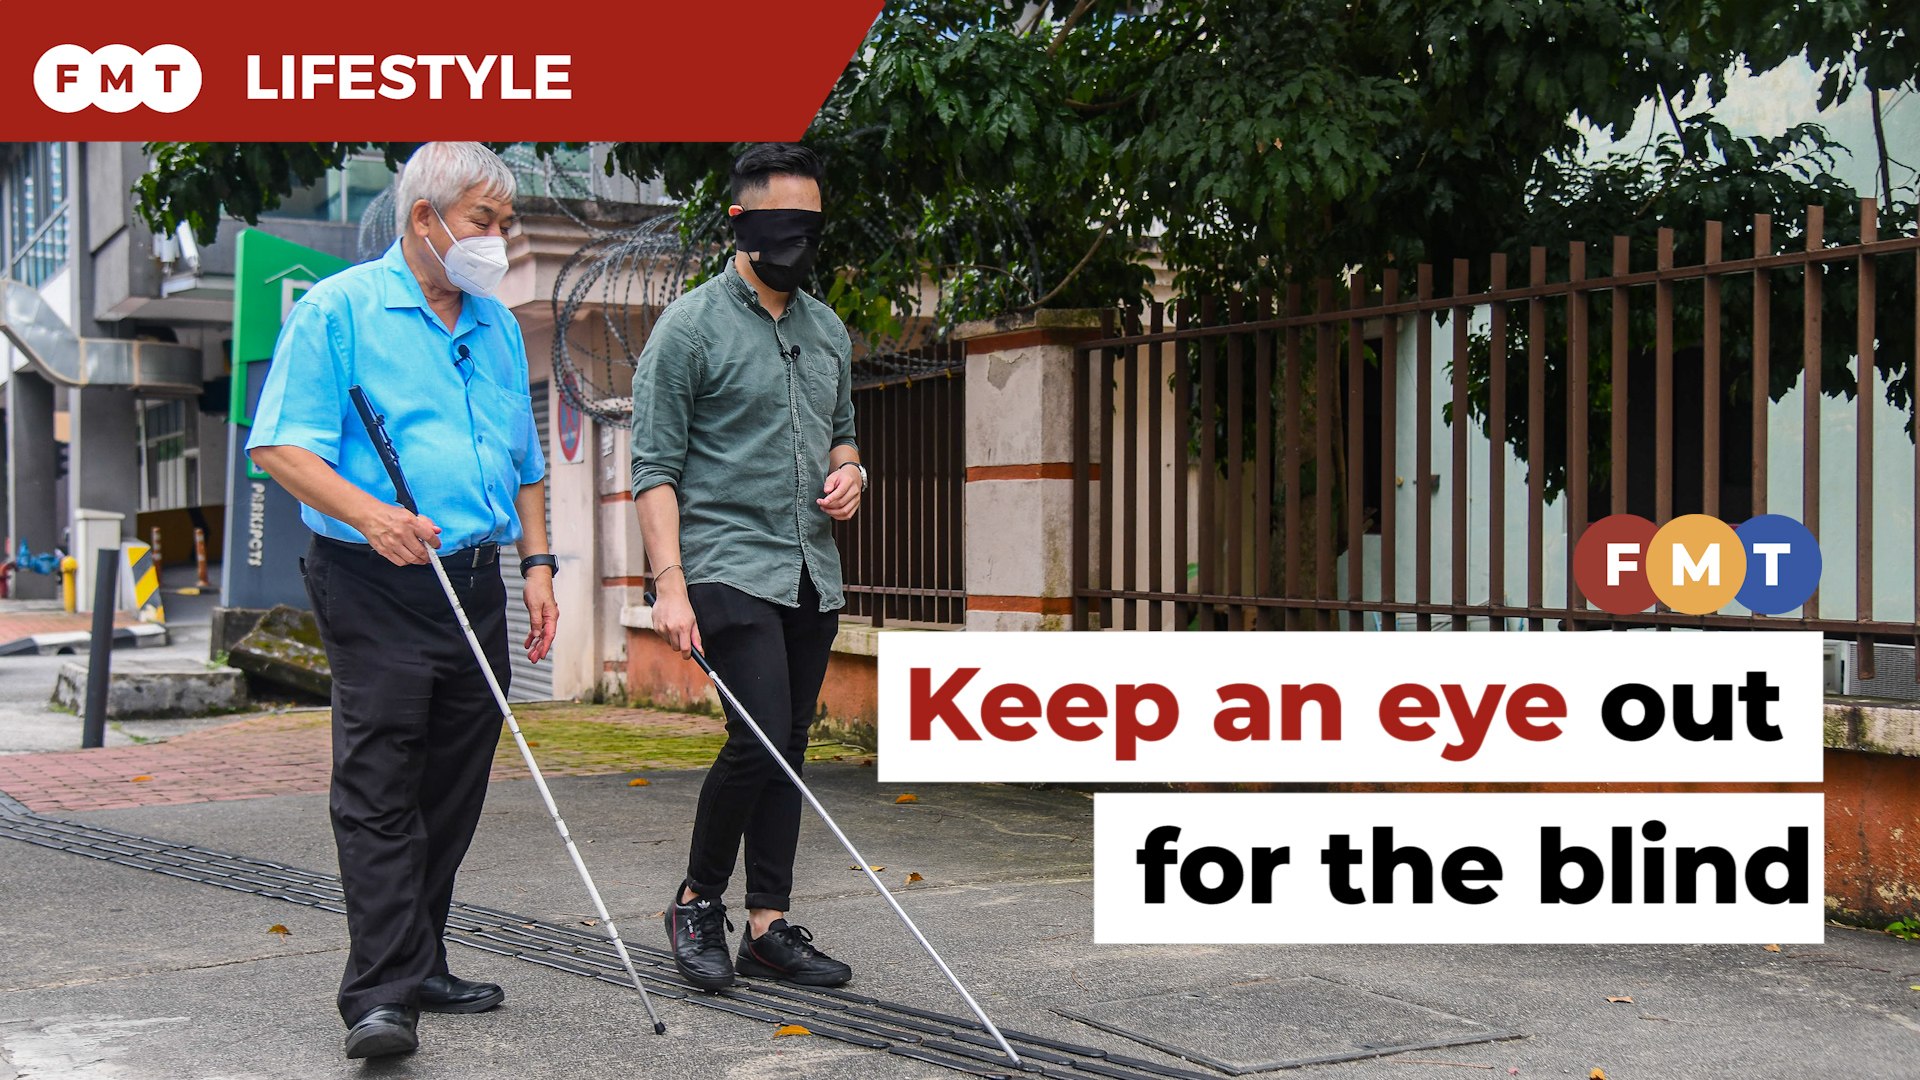 Time for the public to keep an eye out for the blind